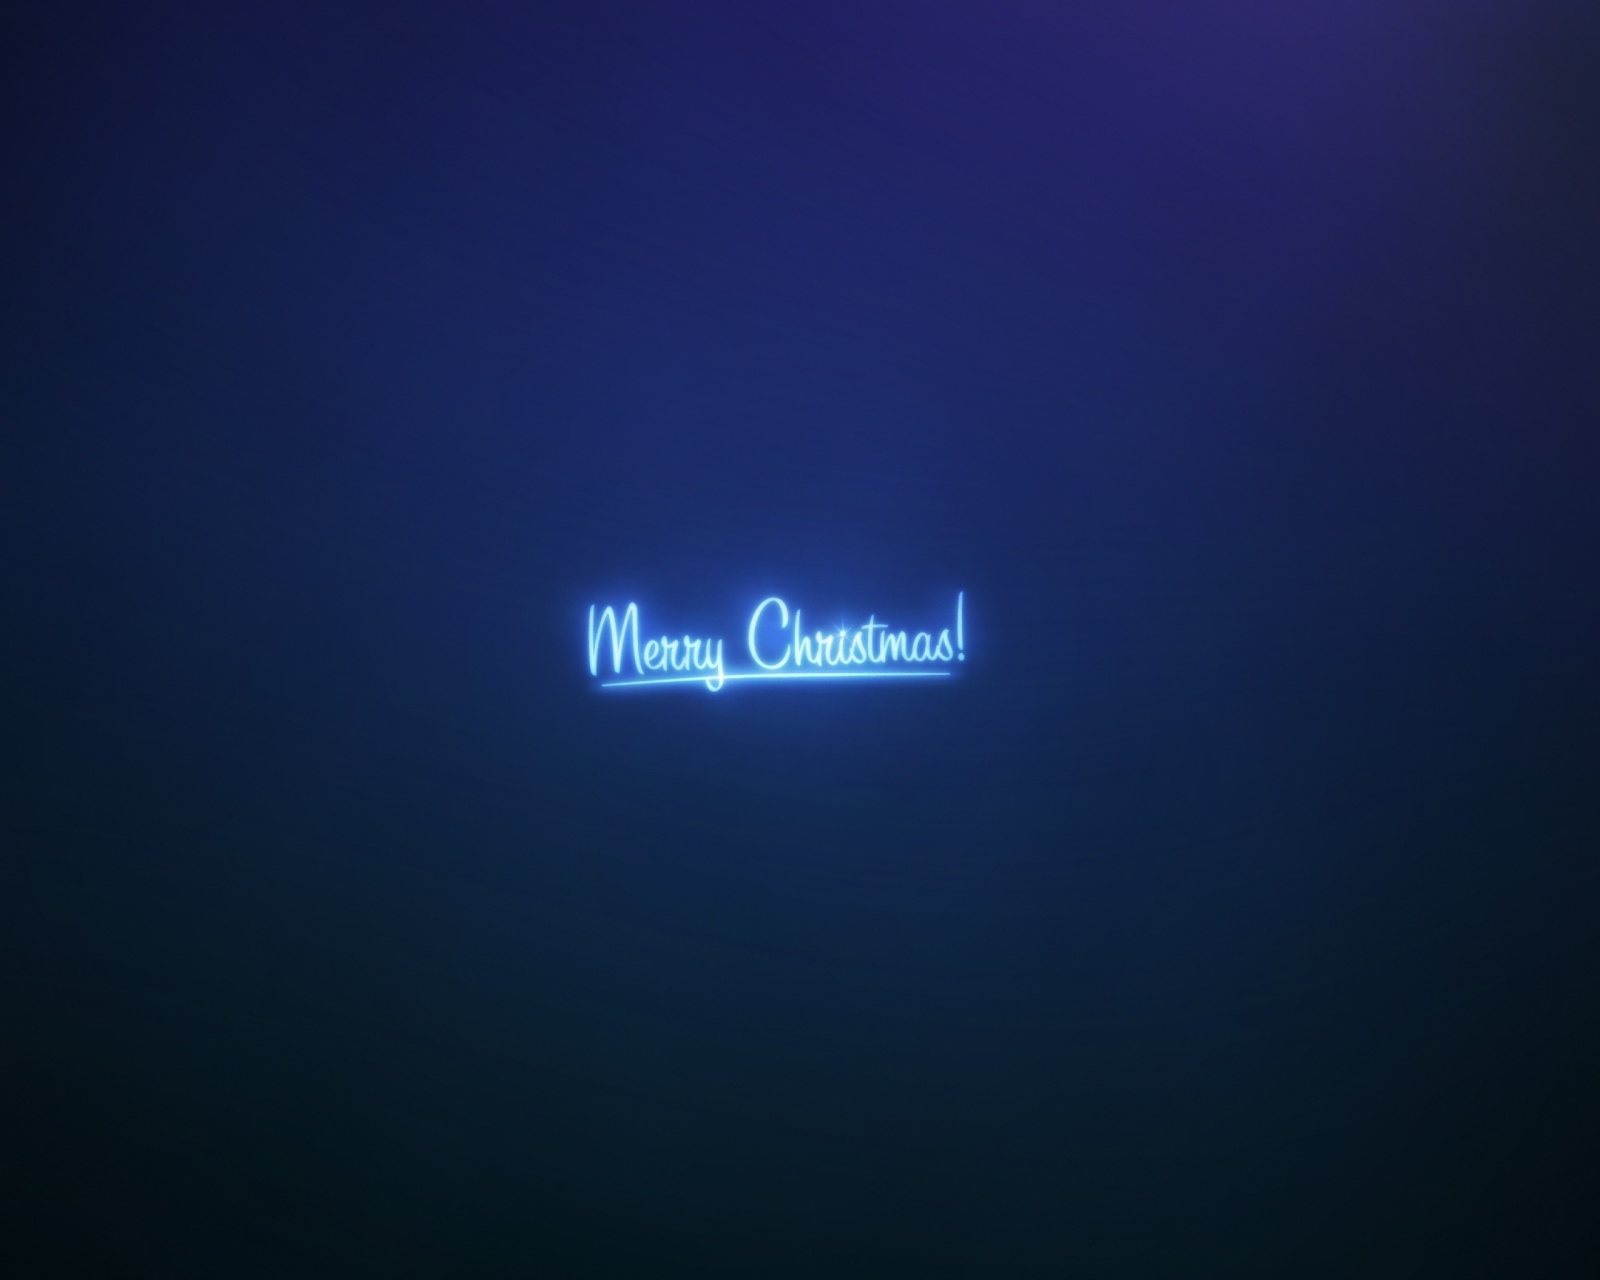 We Wish You a Merry Christmas wallpaper 1600x1280